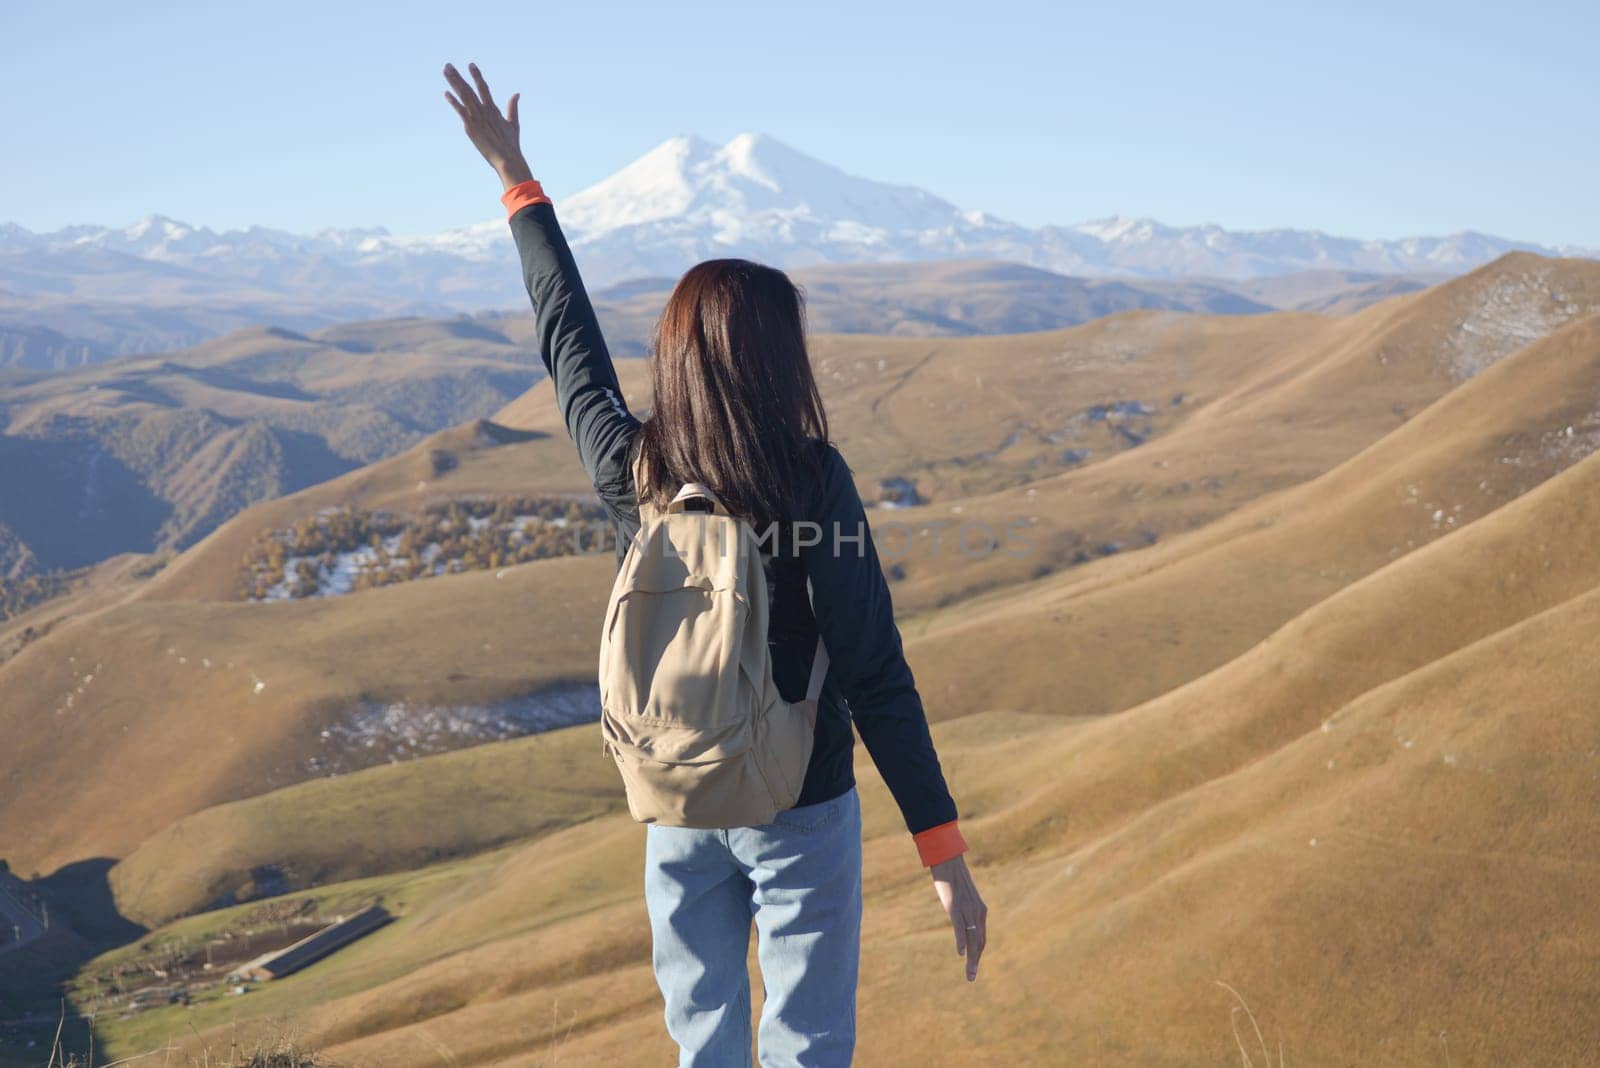 A young brunette woman with a backpack stands against the background of snow-capped Mount Elbrus and looks towards the mountains